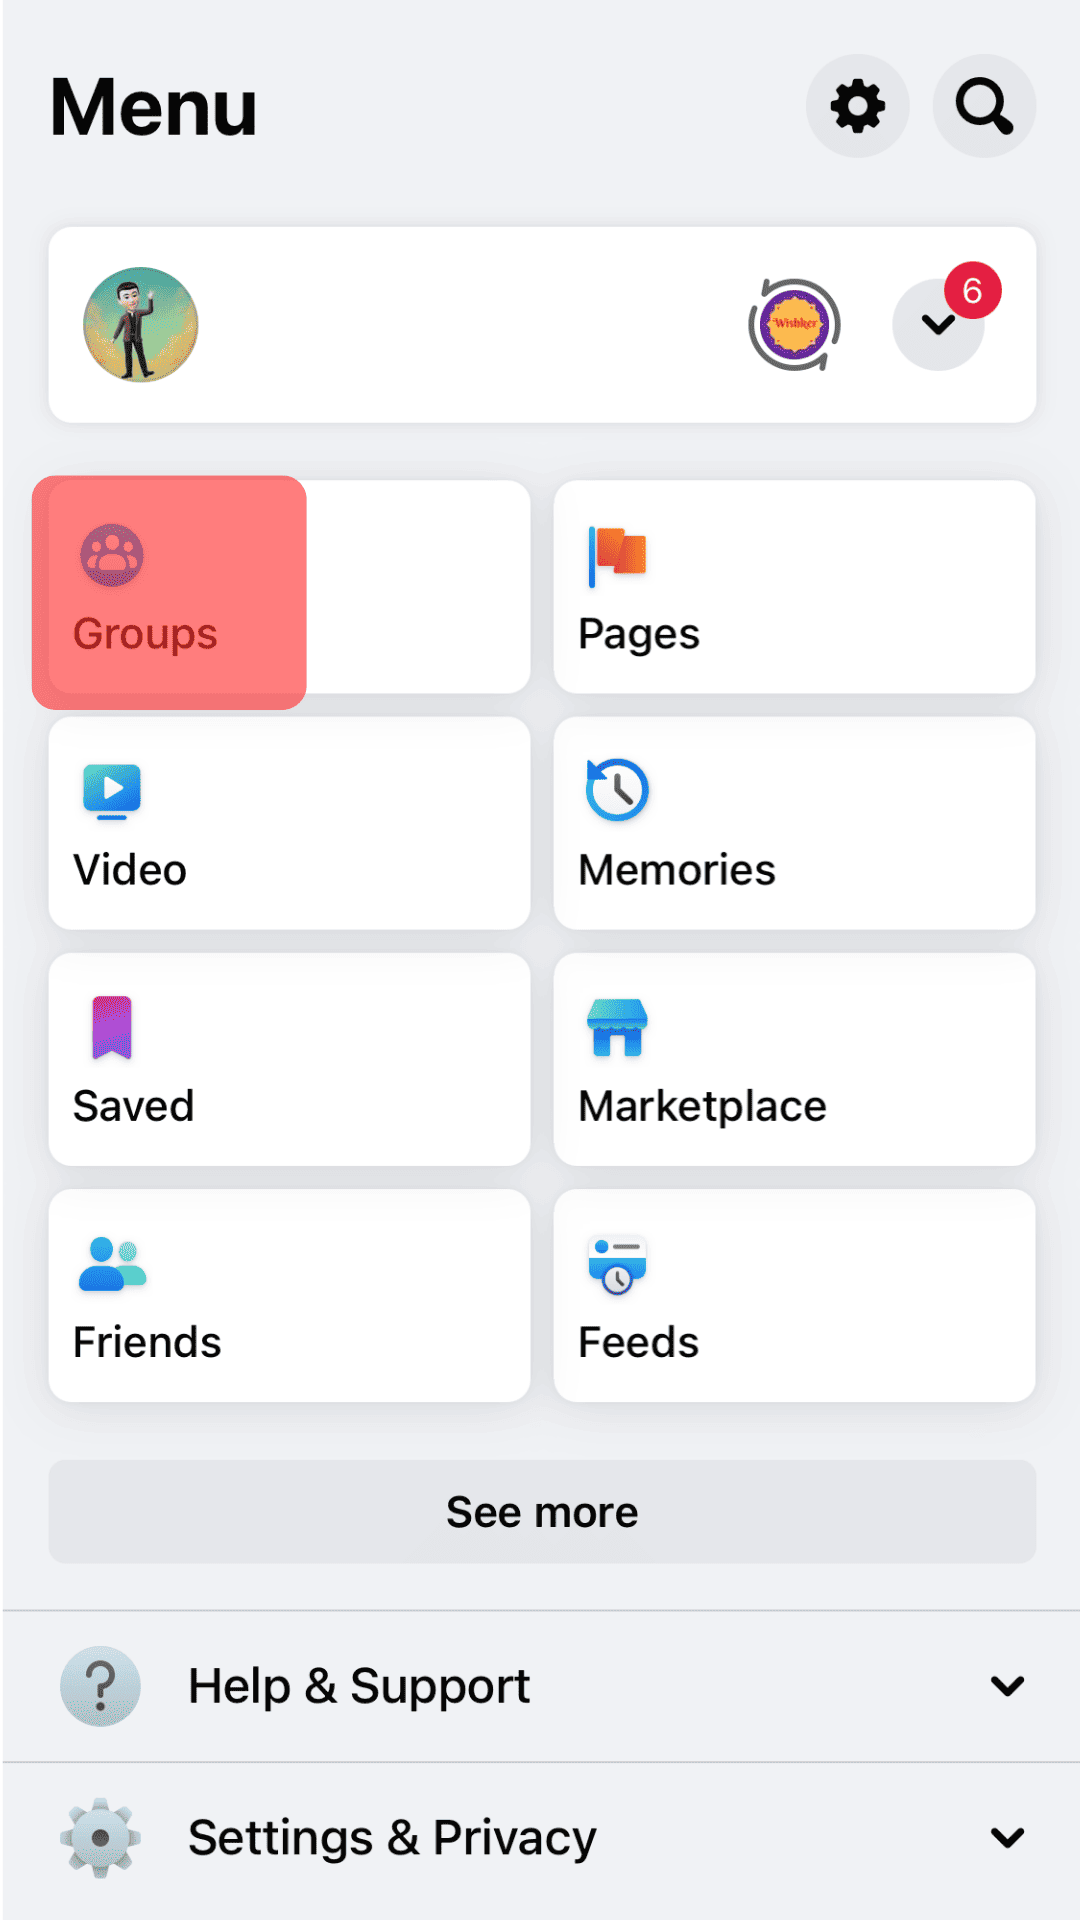 Locate And Tap On Groups.